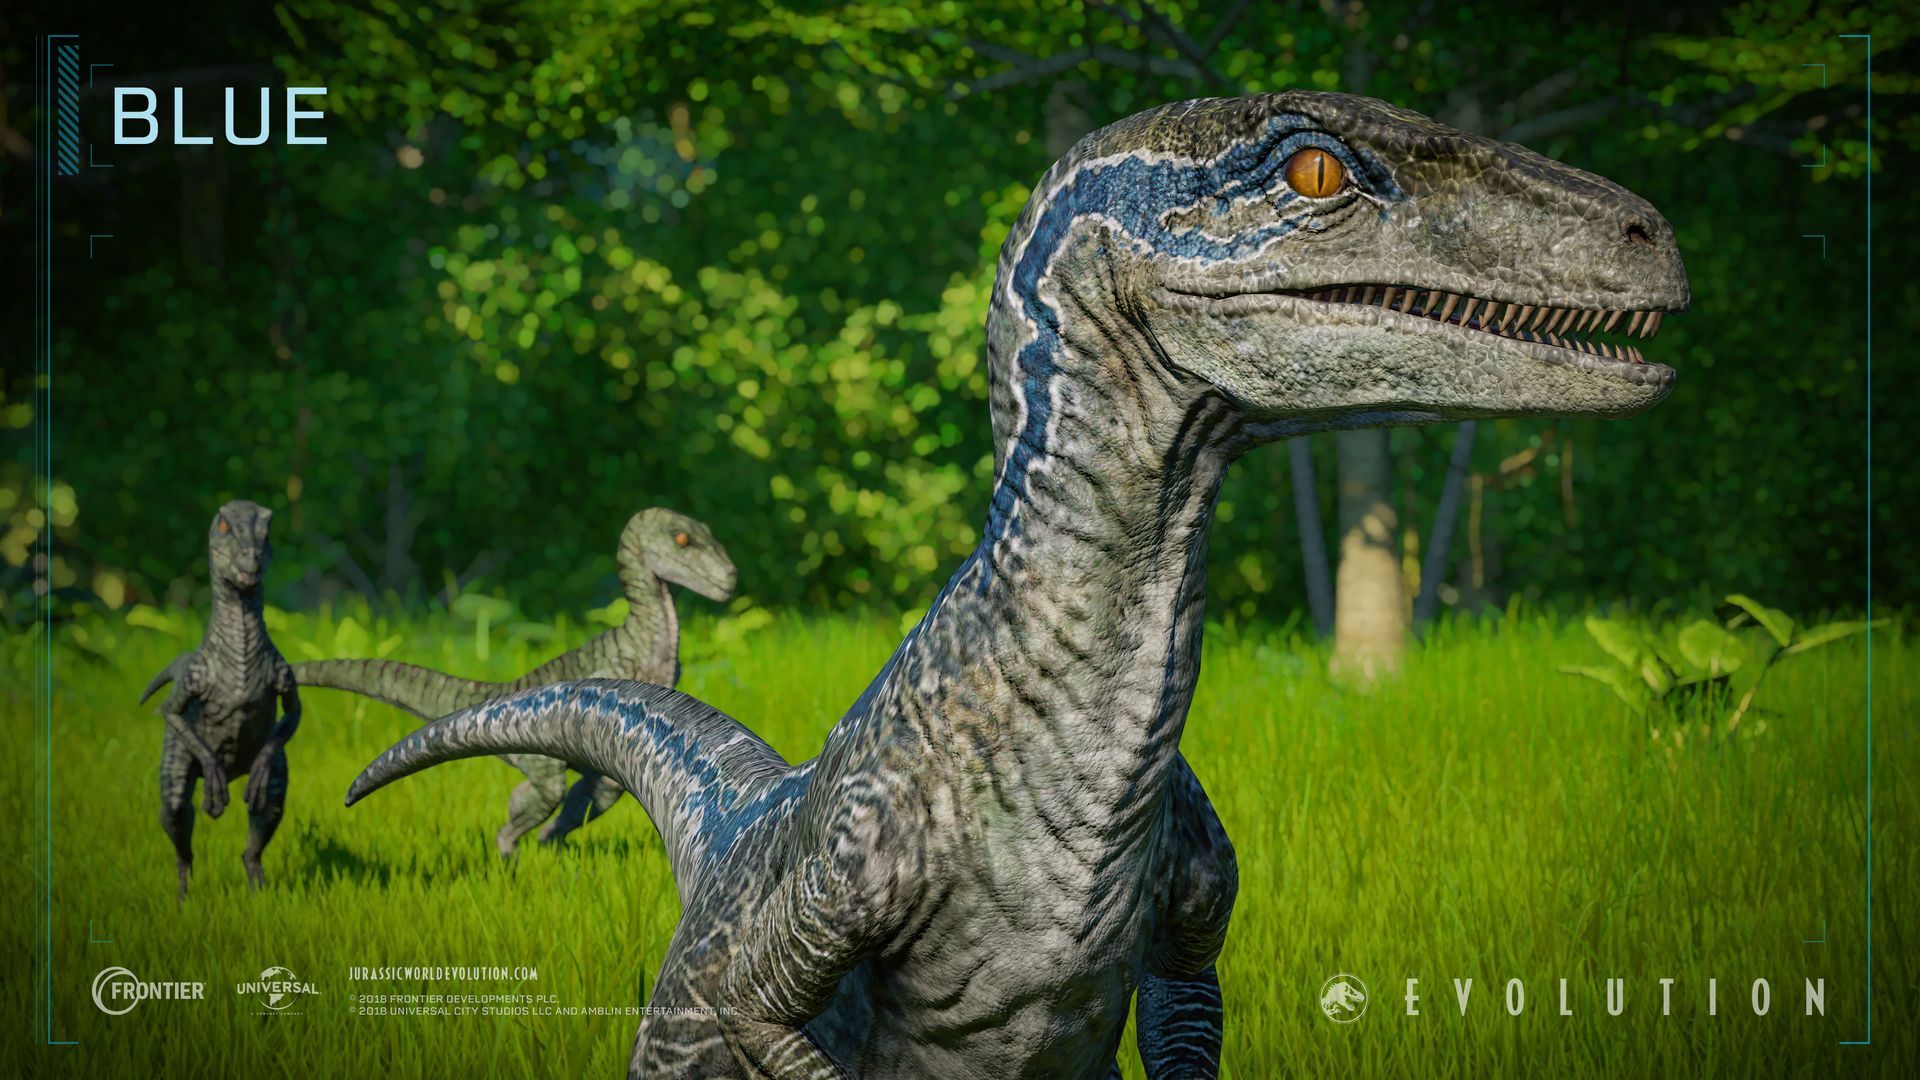 Jurassic World Evolution 2 Blue Delta Echo And Charlie From Jurassic World Are Here To Join The Other Velociraptors In Your Park With The Raptor Squad Skin Collection T Co 3mnzaqw1xj